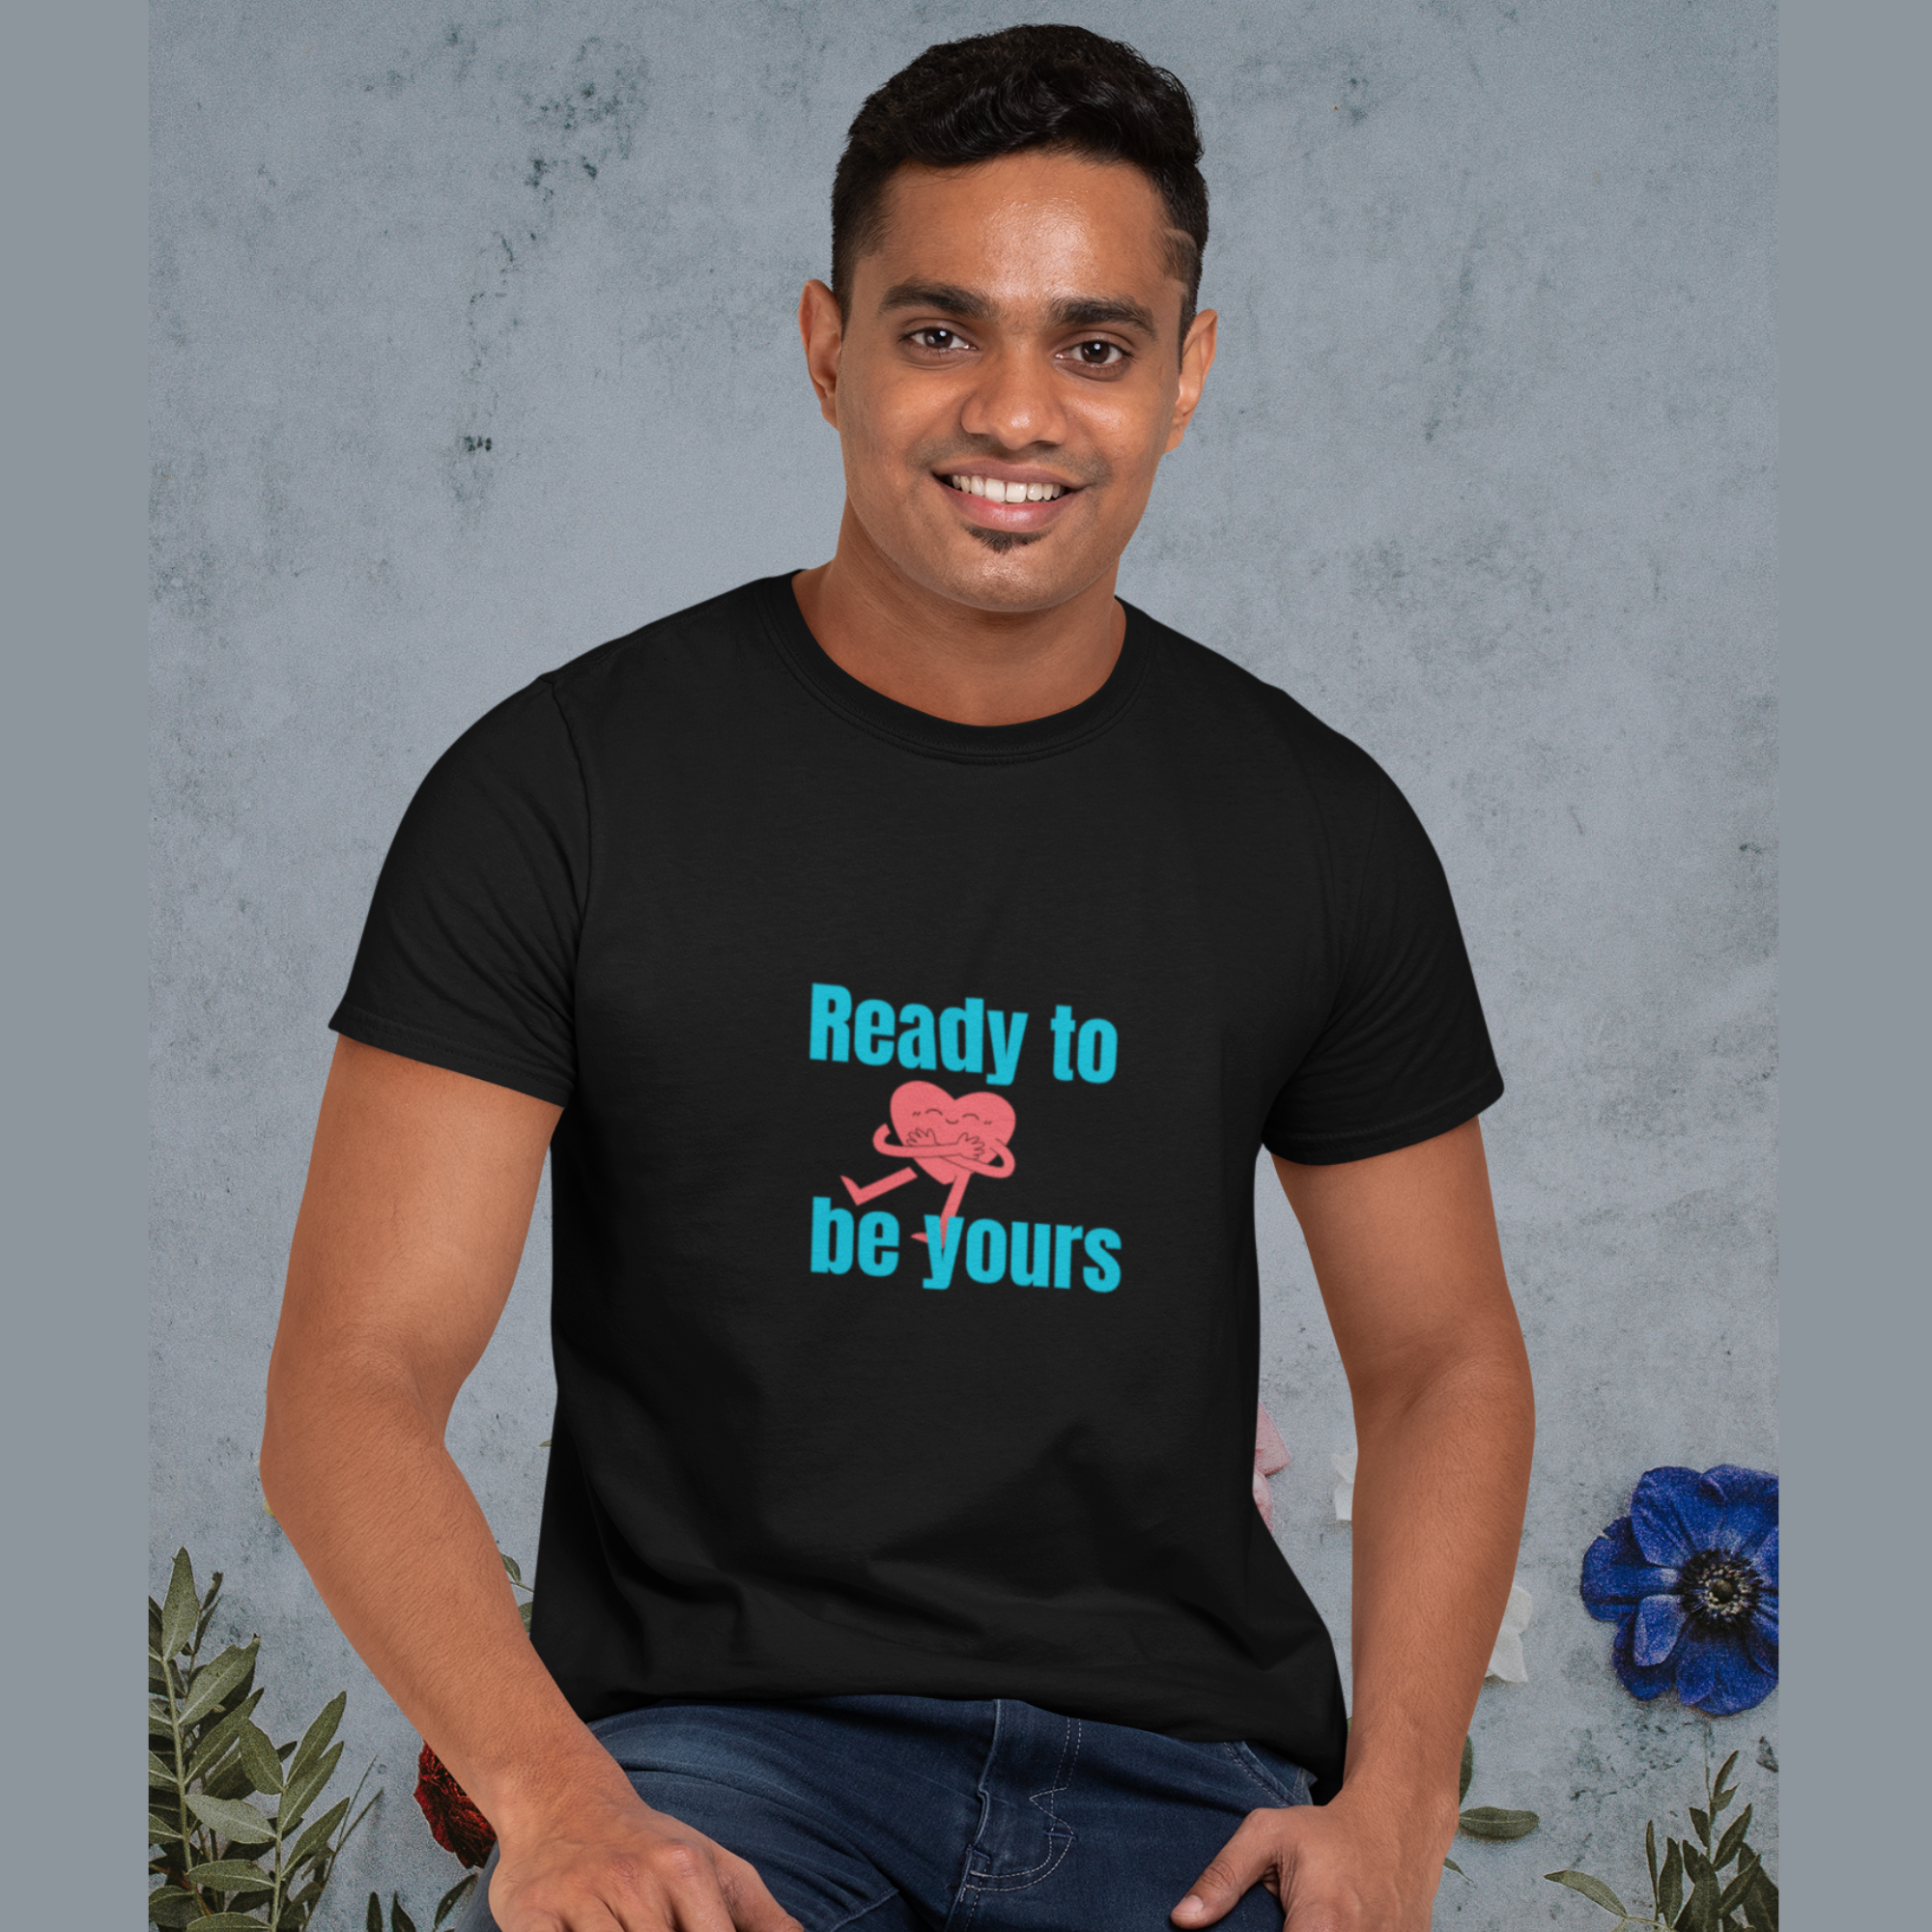 Ready to be yours | Premium Unisex Half Sleeve T-shirt